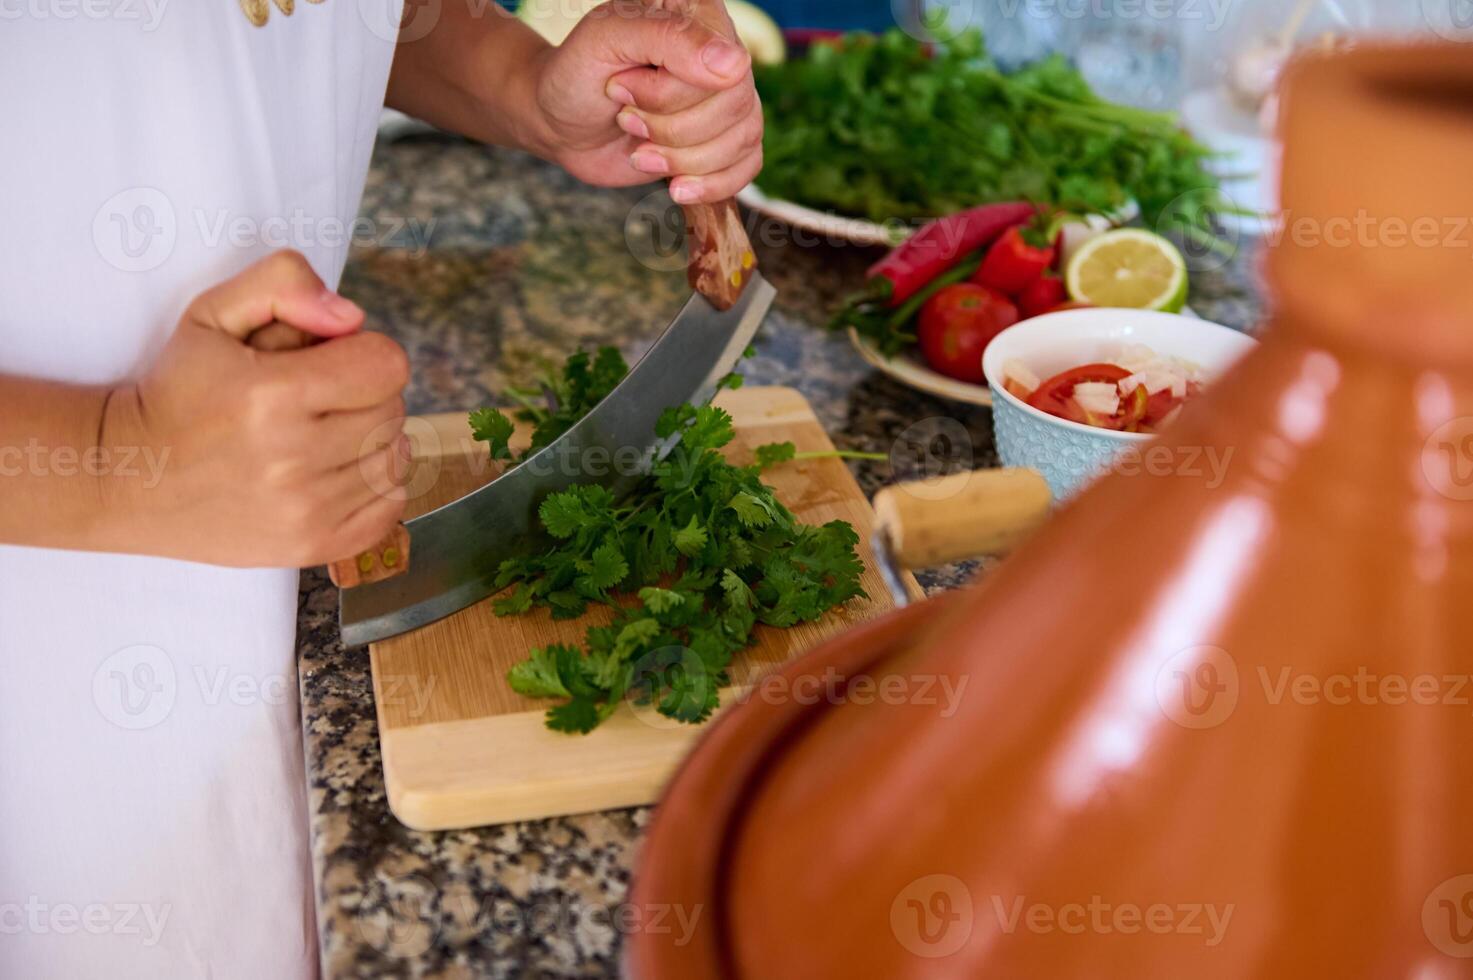 Chef's hands chopping parsley and cilantro green herbs for seasoning a traditional Moroccan dish - veggies in tagine photo